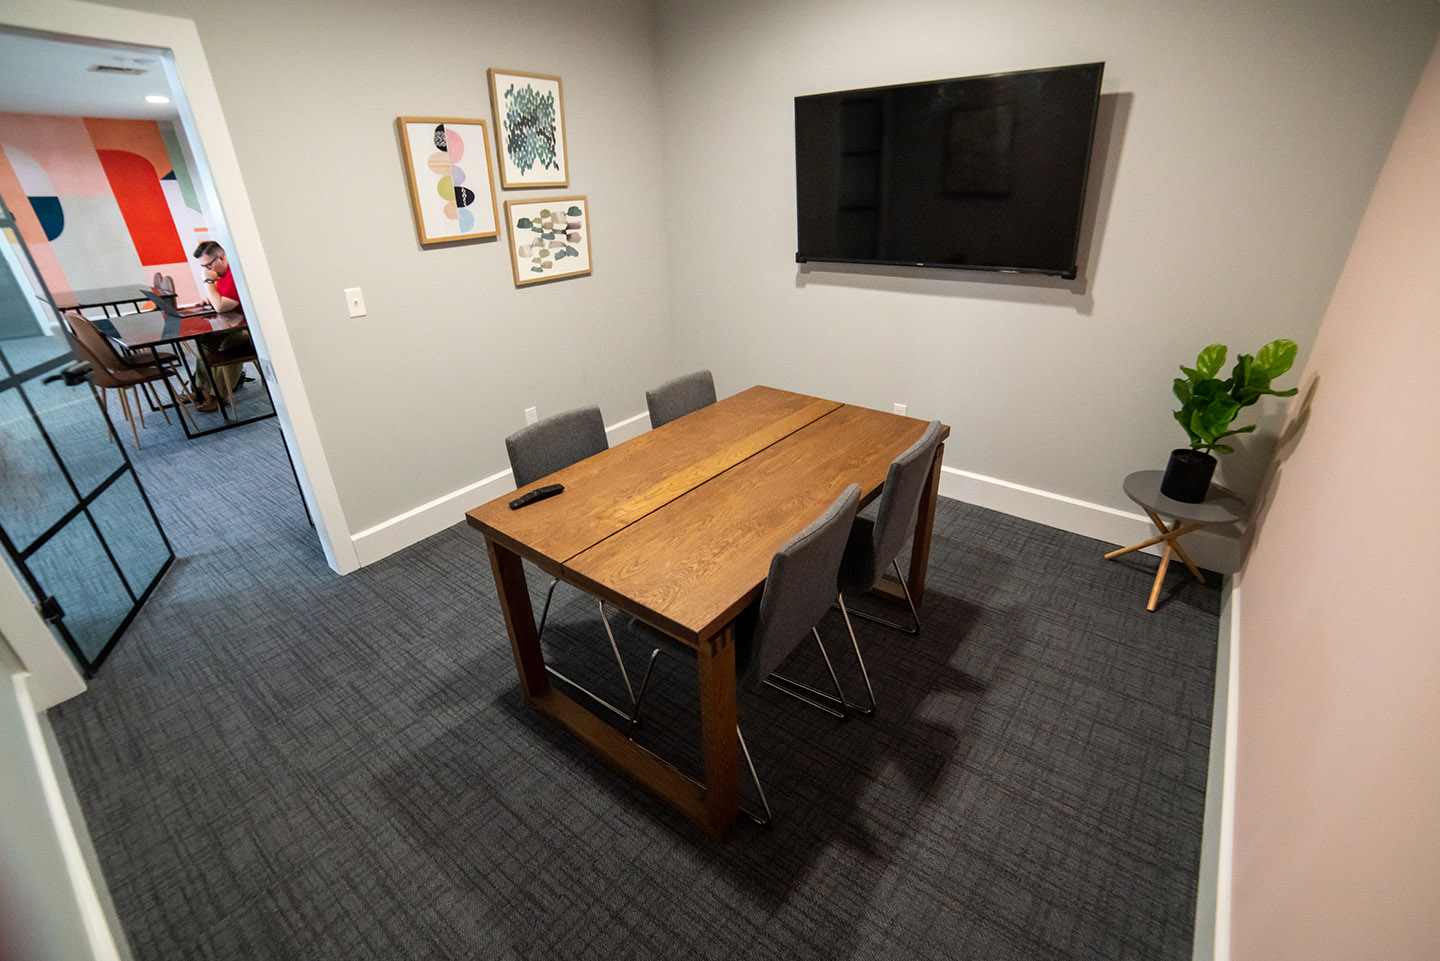 Office space feating a wooden table, four chairs, potted plans, wall art and a mounted tv